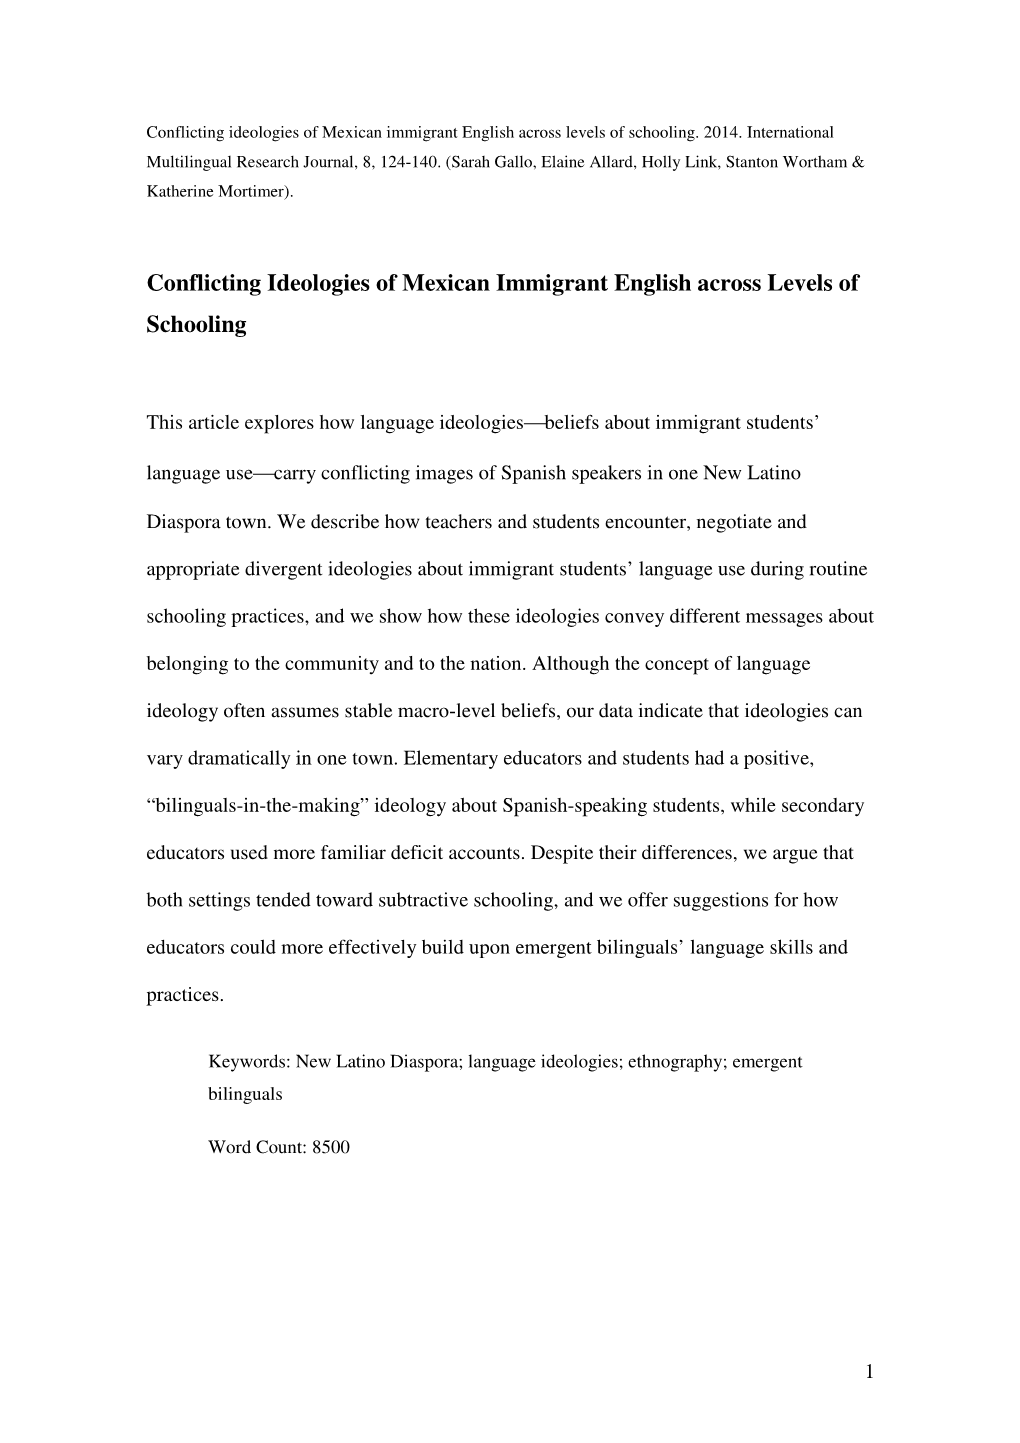 Conflicting Ideologies of Mexican Immigrant English Across Levels of Schooling